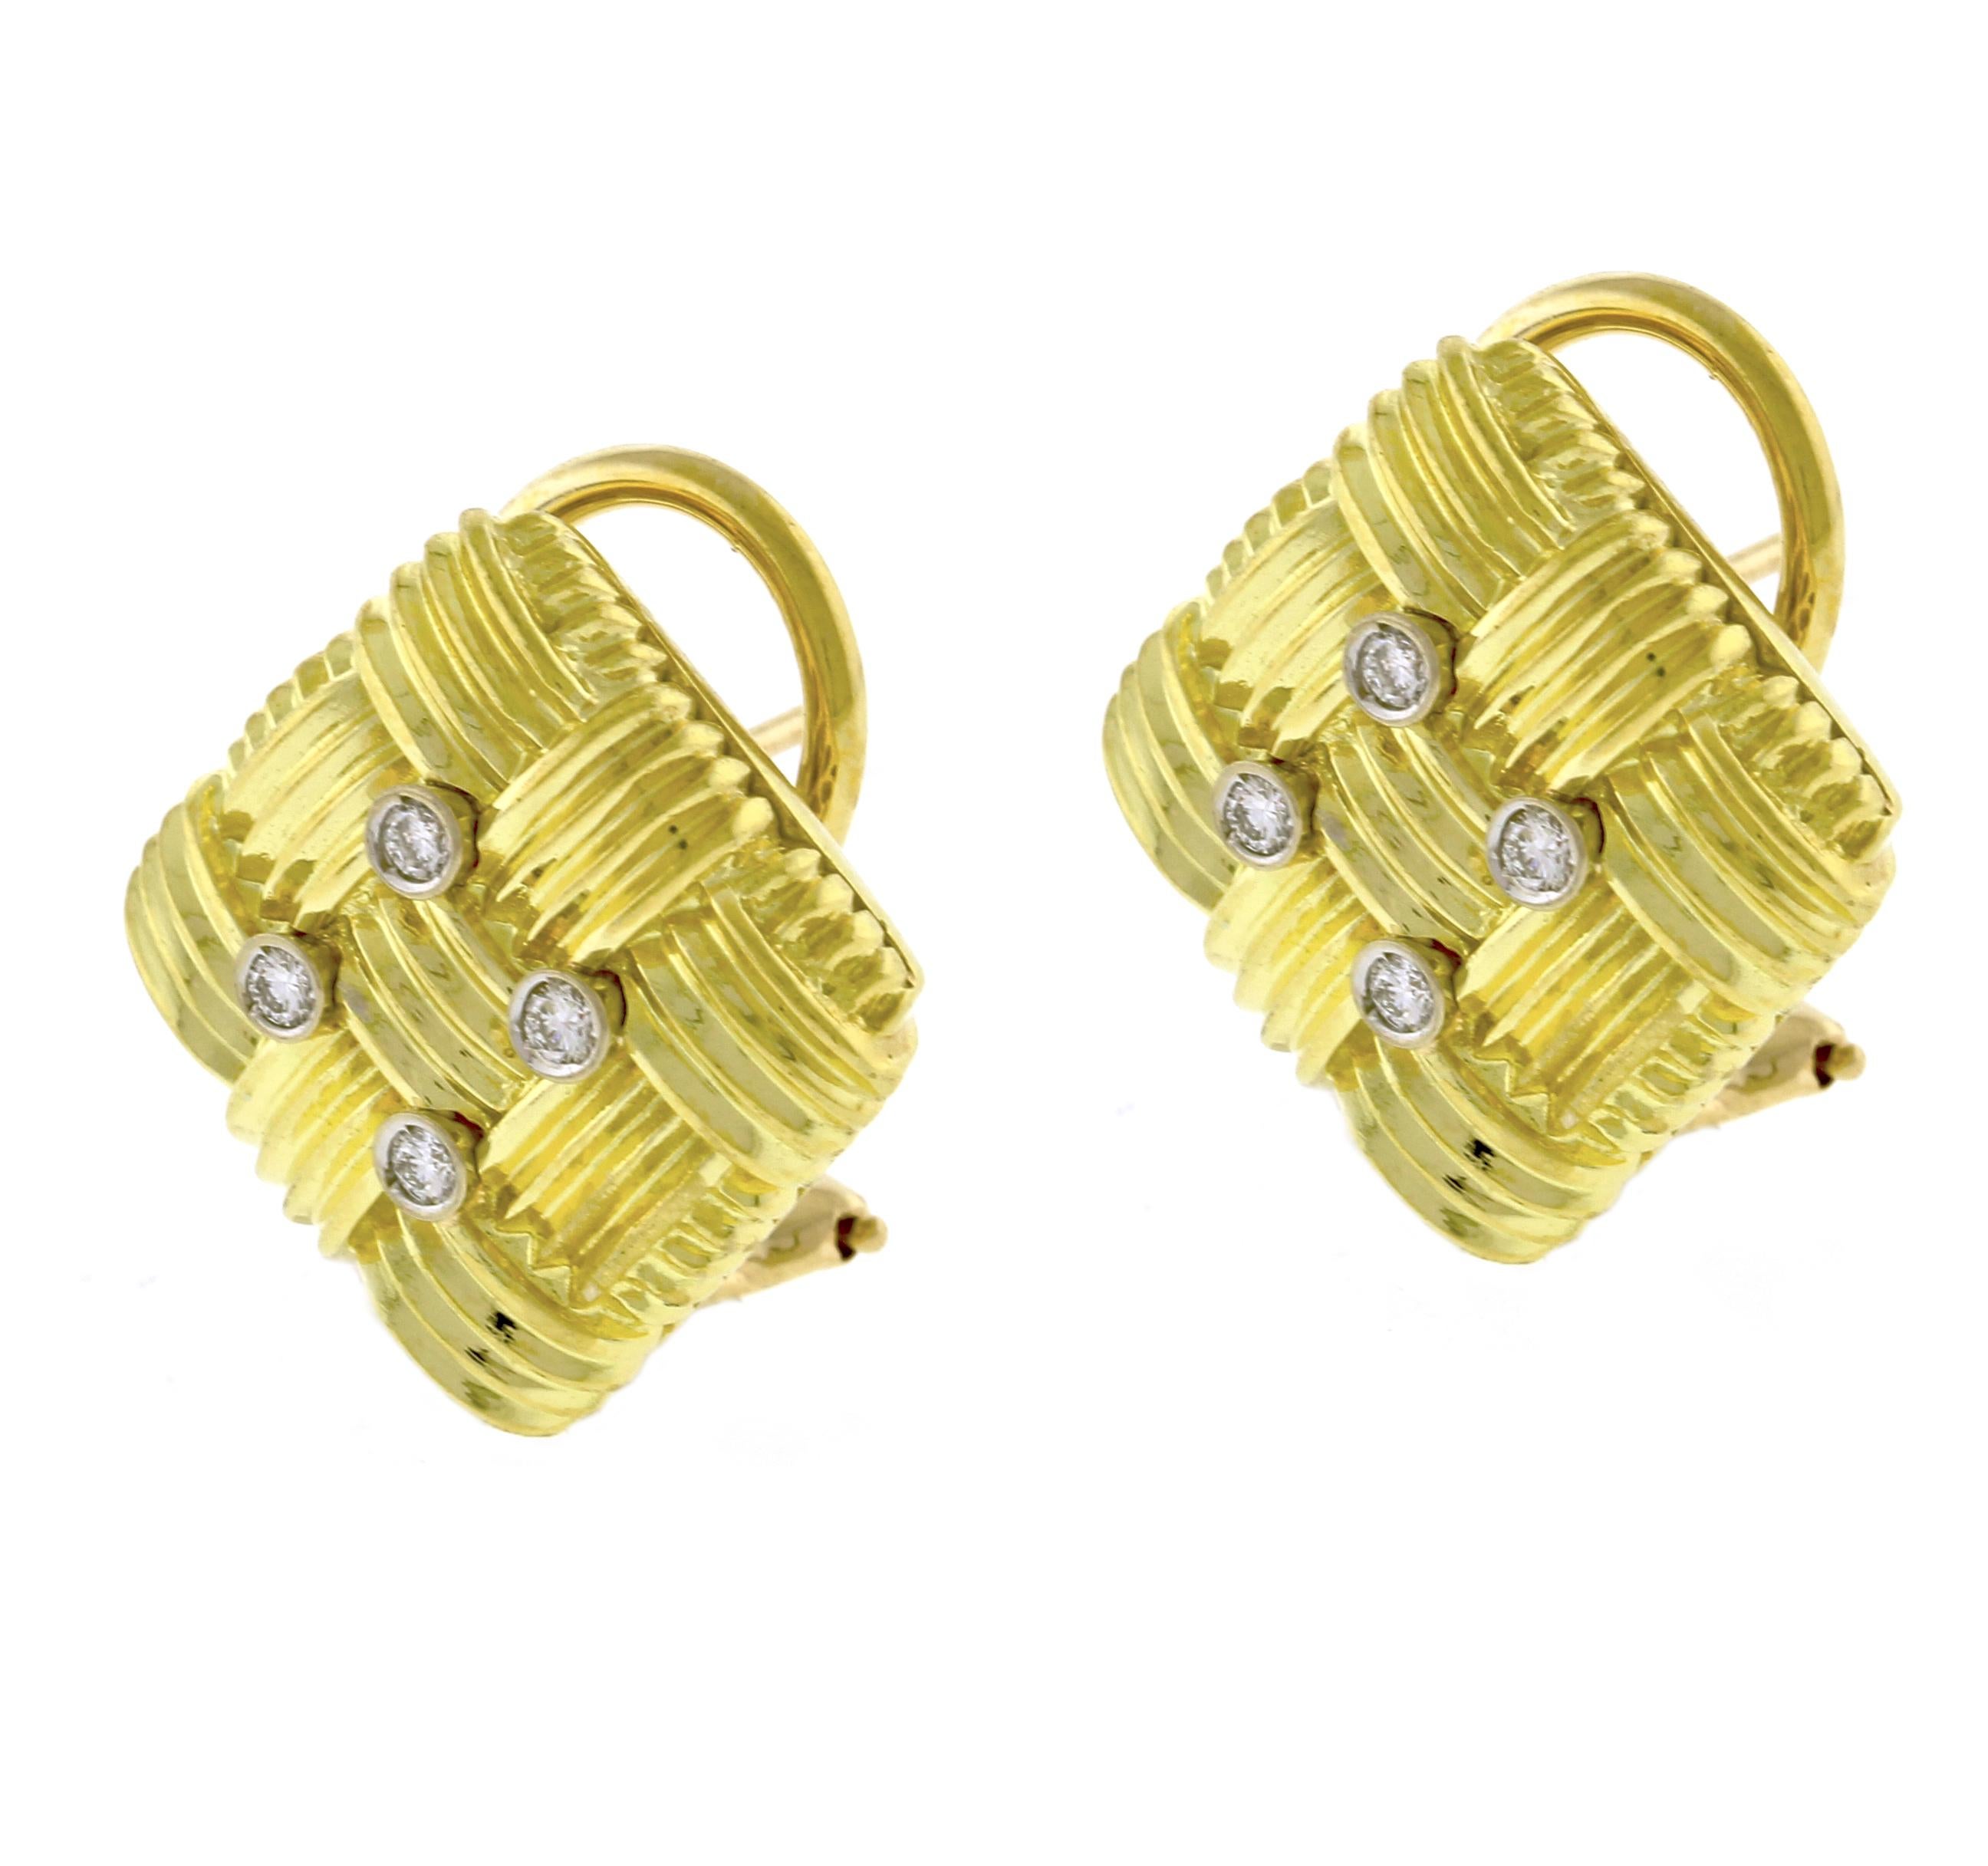 As the name suggests, the Appassionata collection, a true classic from Roberto Coin, is well-suited to “passionate” wearers. Constructed from ribbed, interlocking 18K yellow gold links alternating in a basket-weave design these  earrings have a